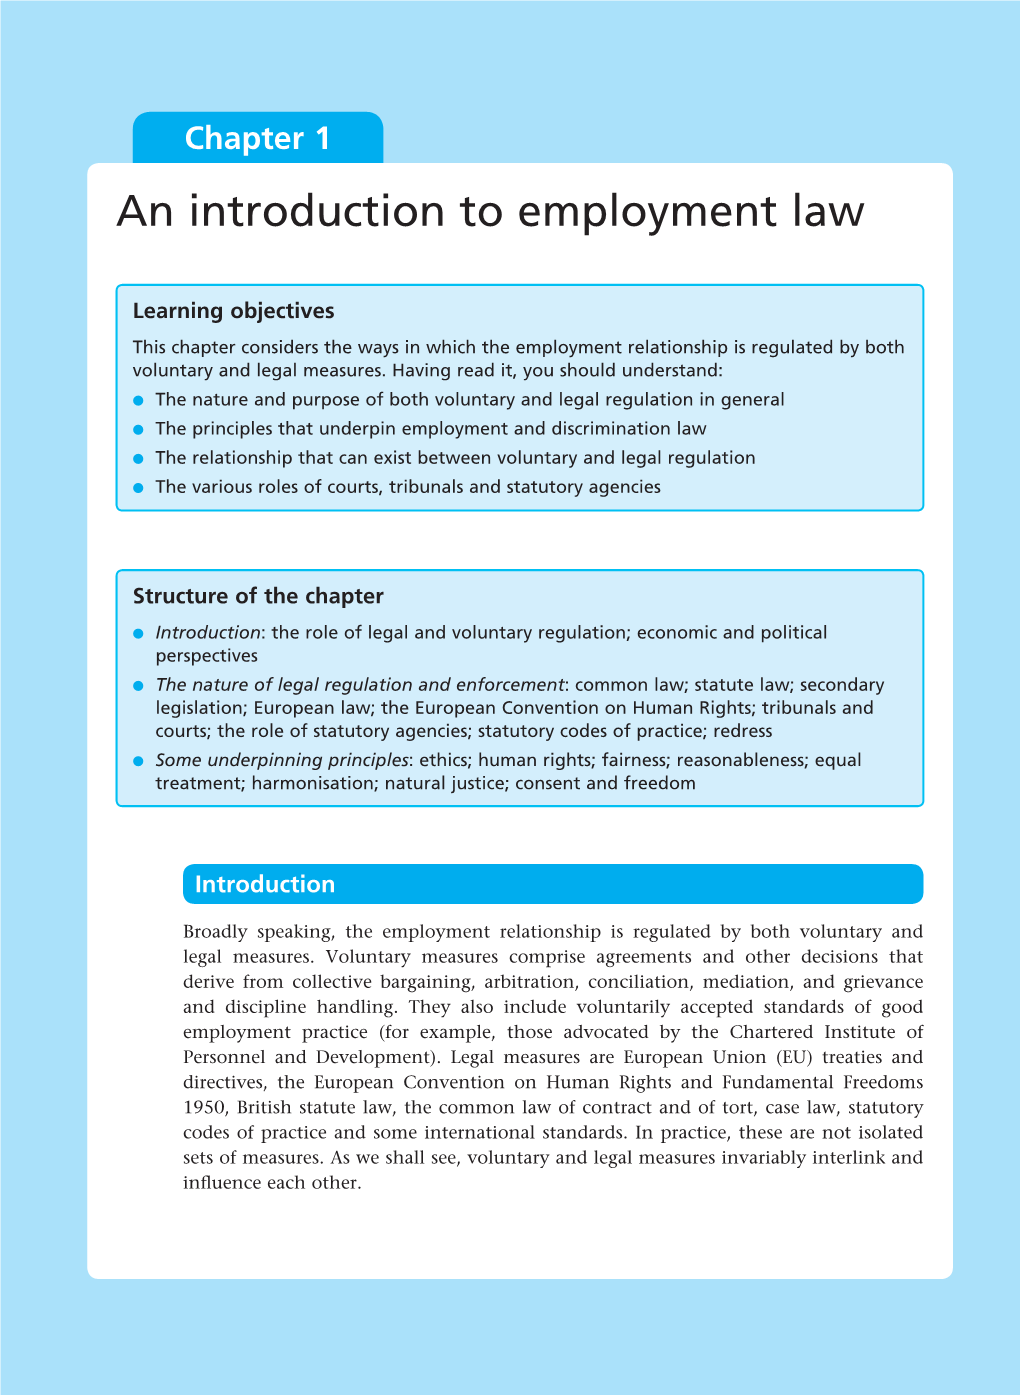 Chapter 1 an Introduction to Employment Law